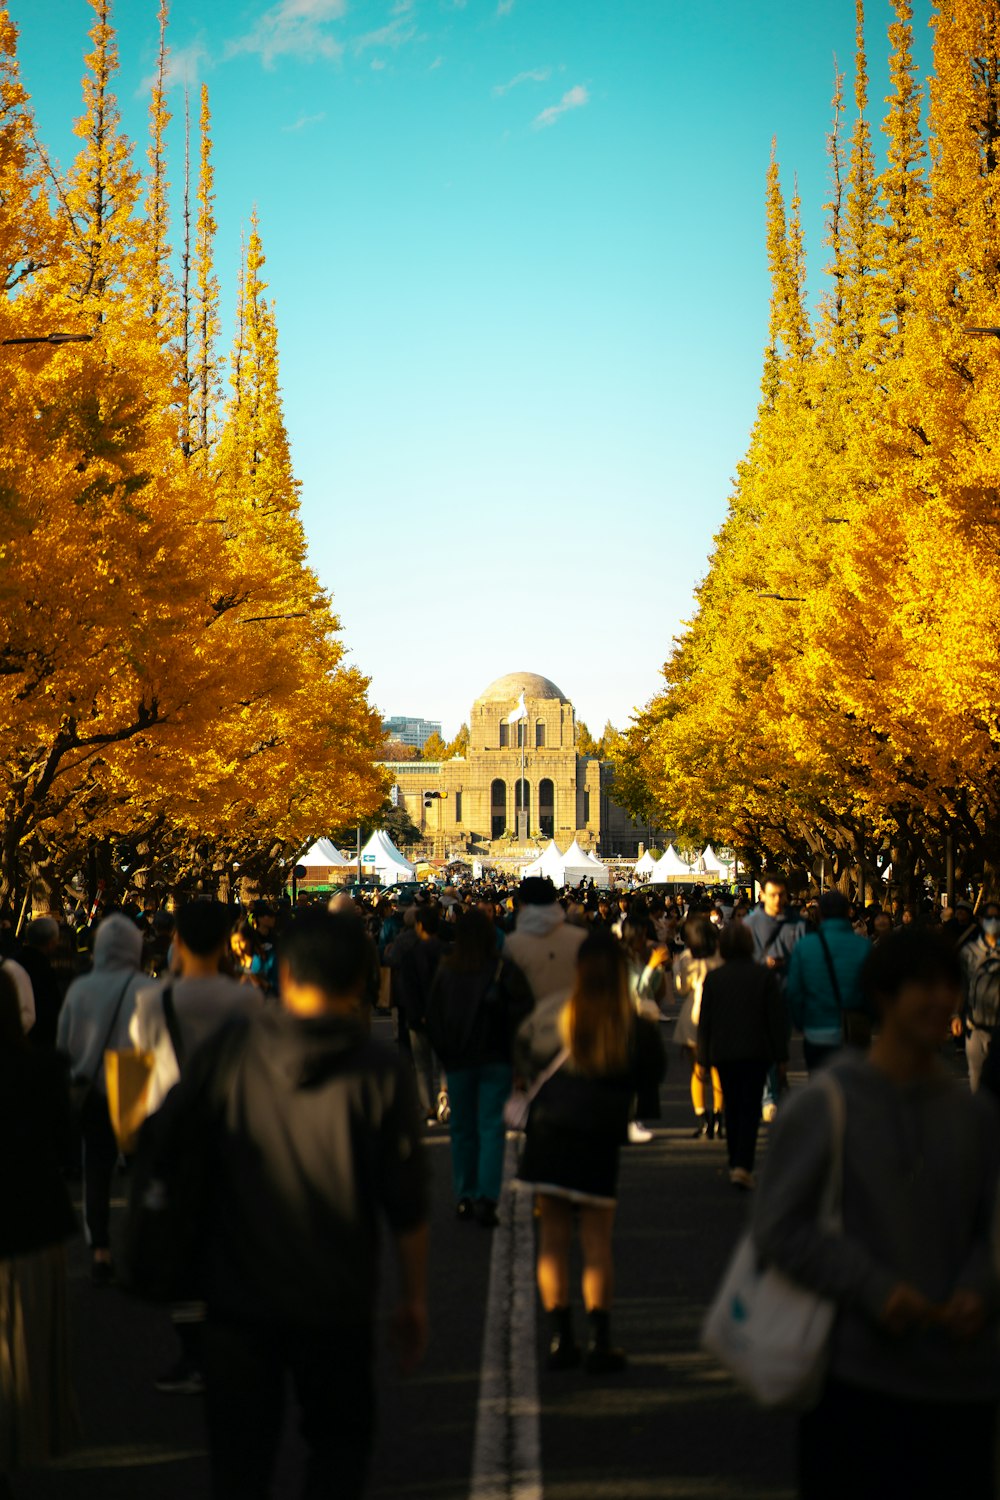 a crowd of people walking down a street next to tall trees